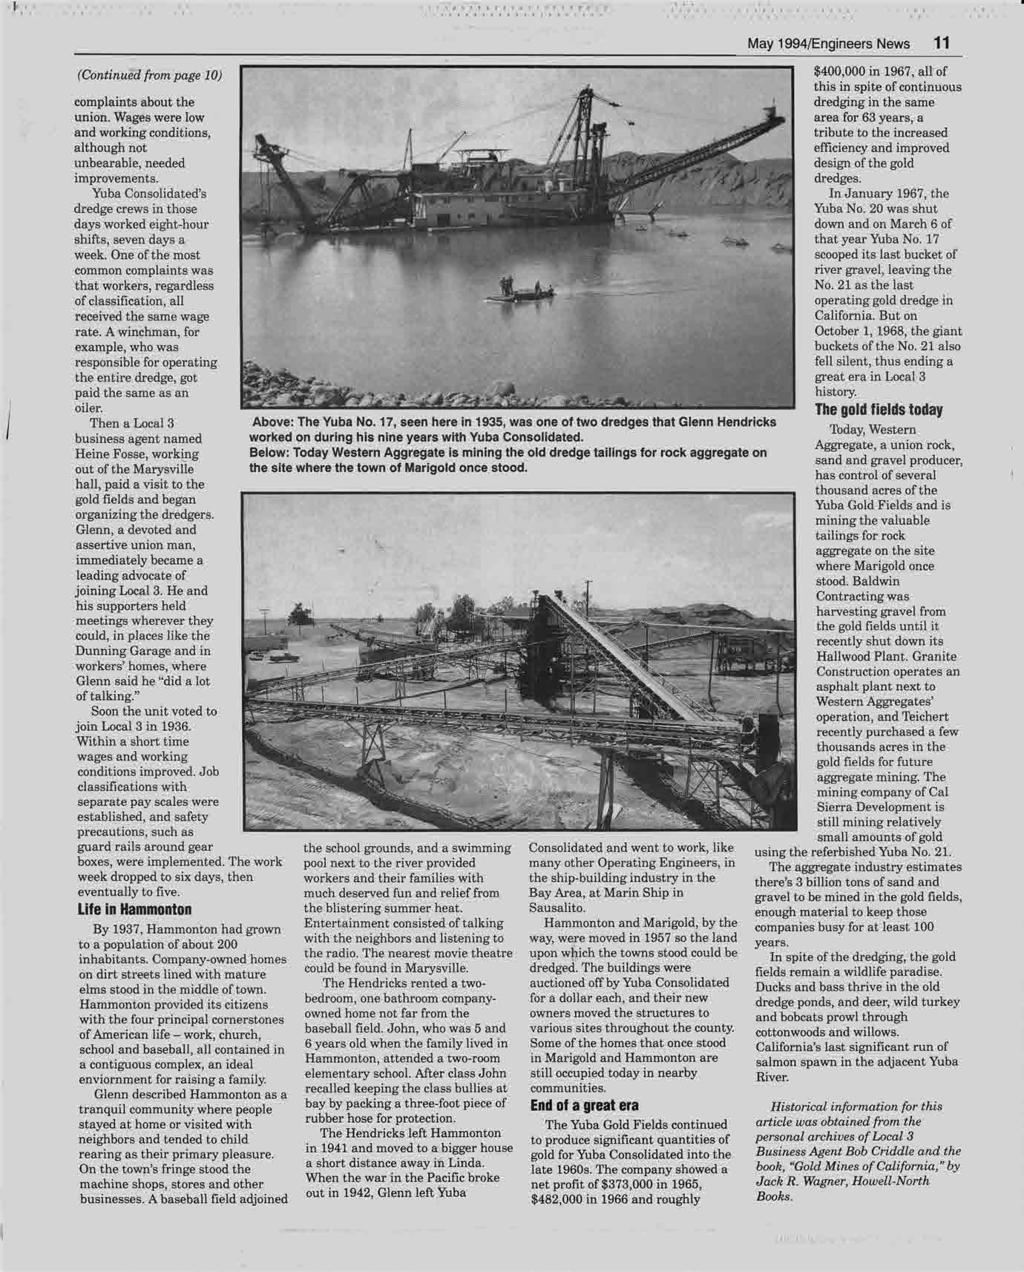 1 1 May 1994/Engineers News 11 (Continued from page 10) $400,000 in 1967, all of complaints about the this in spite of continuous dredging in the same union.